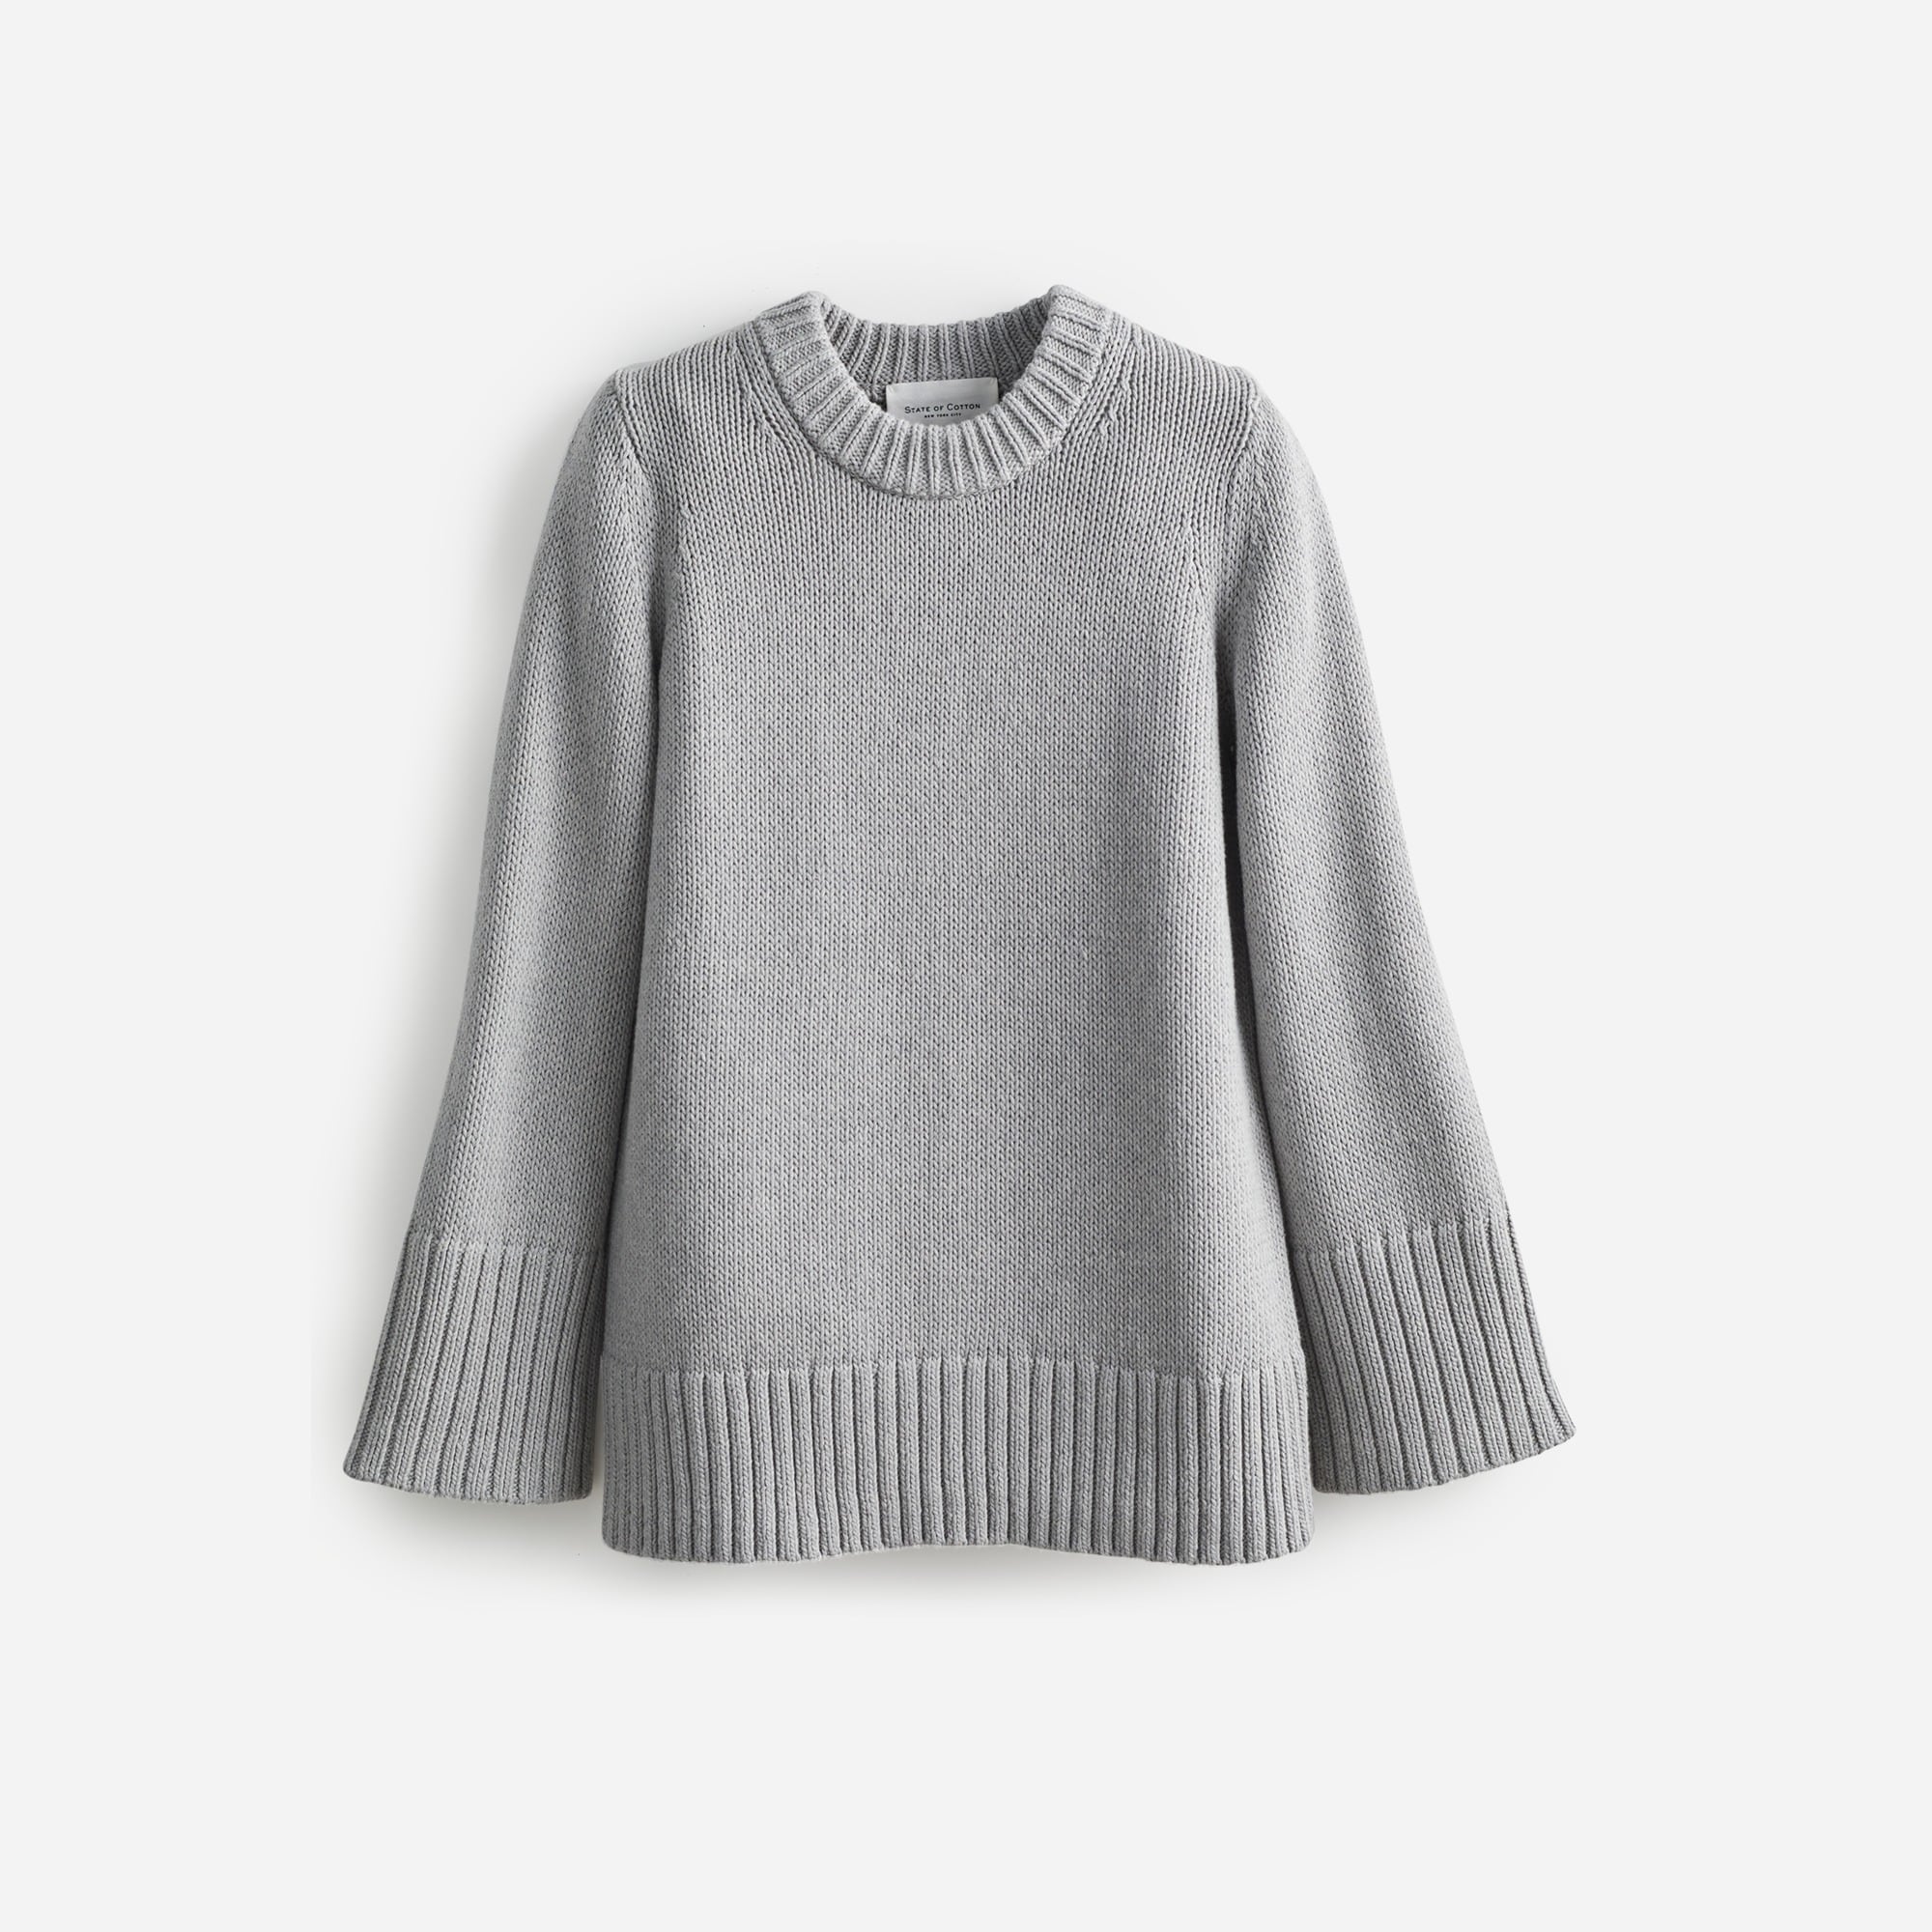 Jcrew State of Cotton NYC Kittery sweater